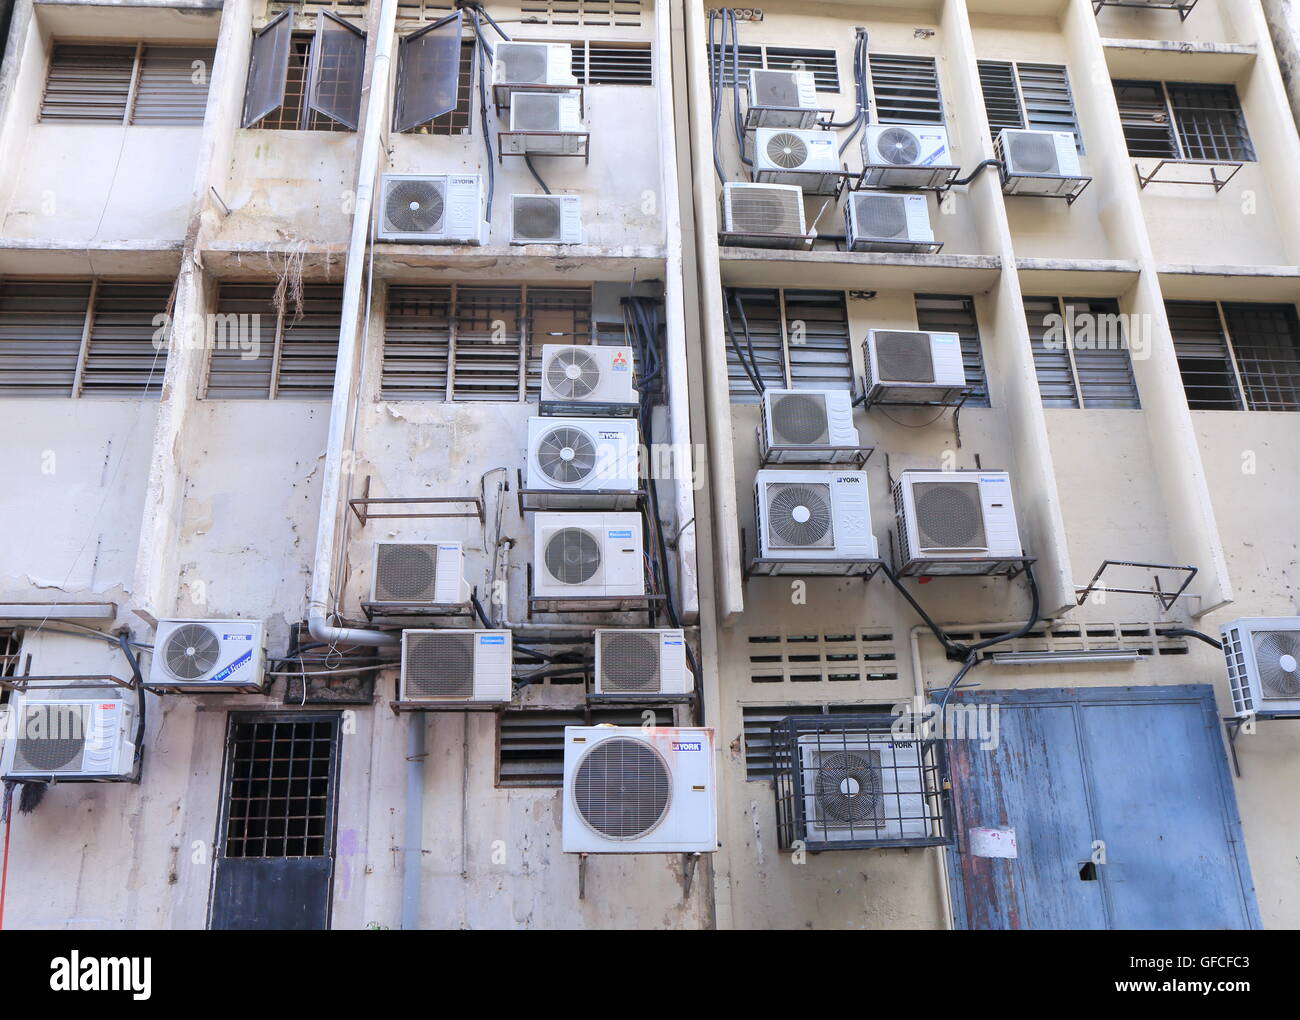 Air conditioning units installed to a building in Kuala Lumpur Malaysia. Stock Photo